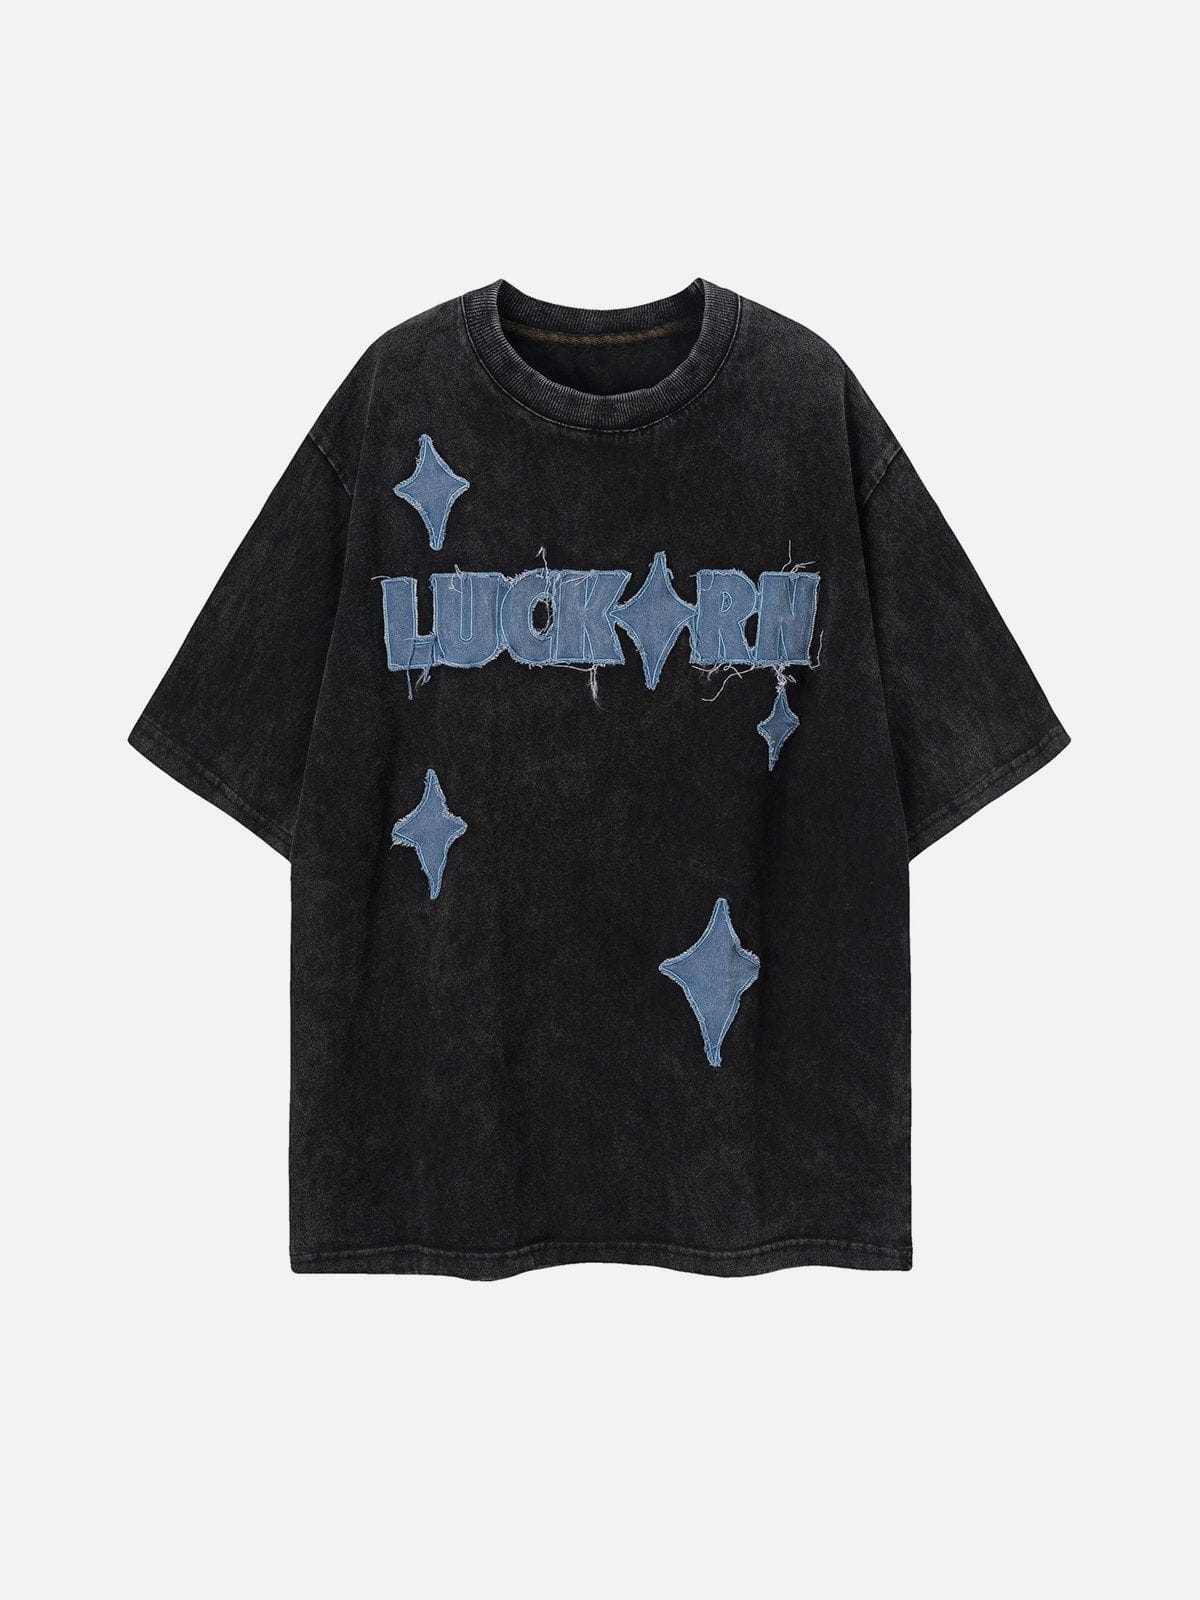 Sneakerland™ - Star Embroidery Lettter Tee